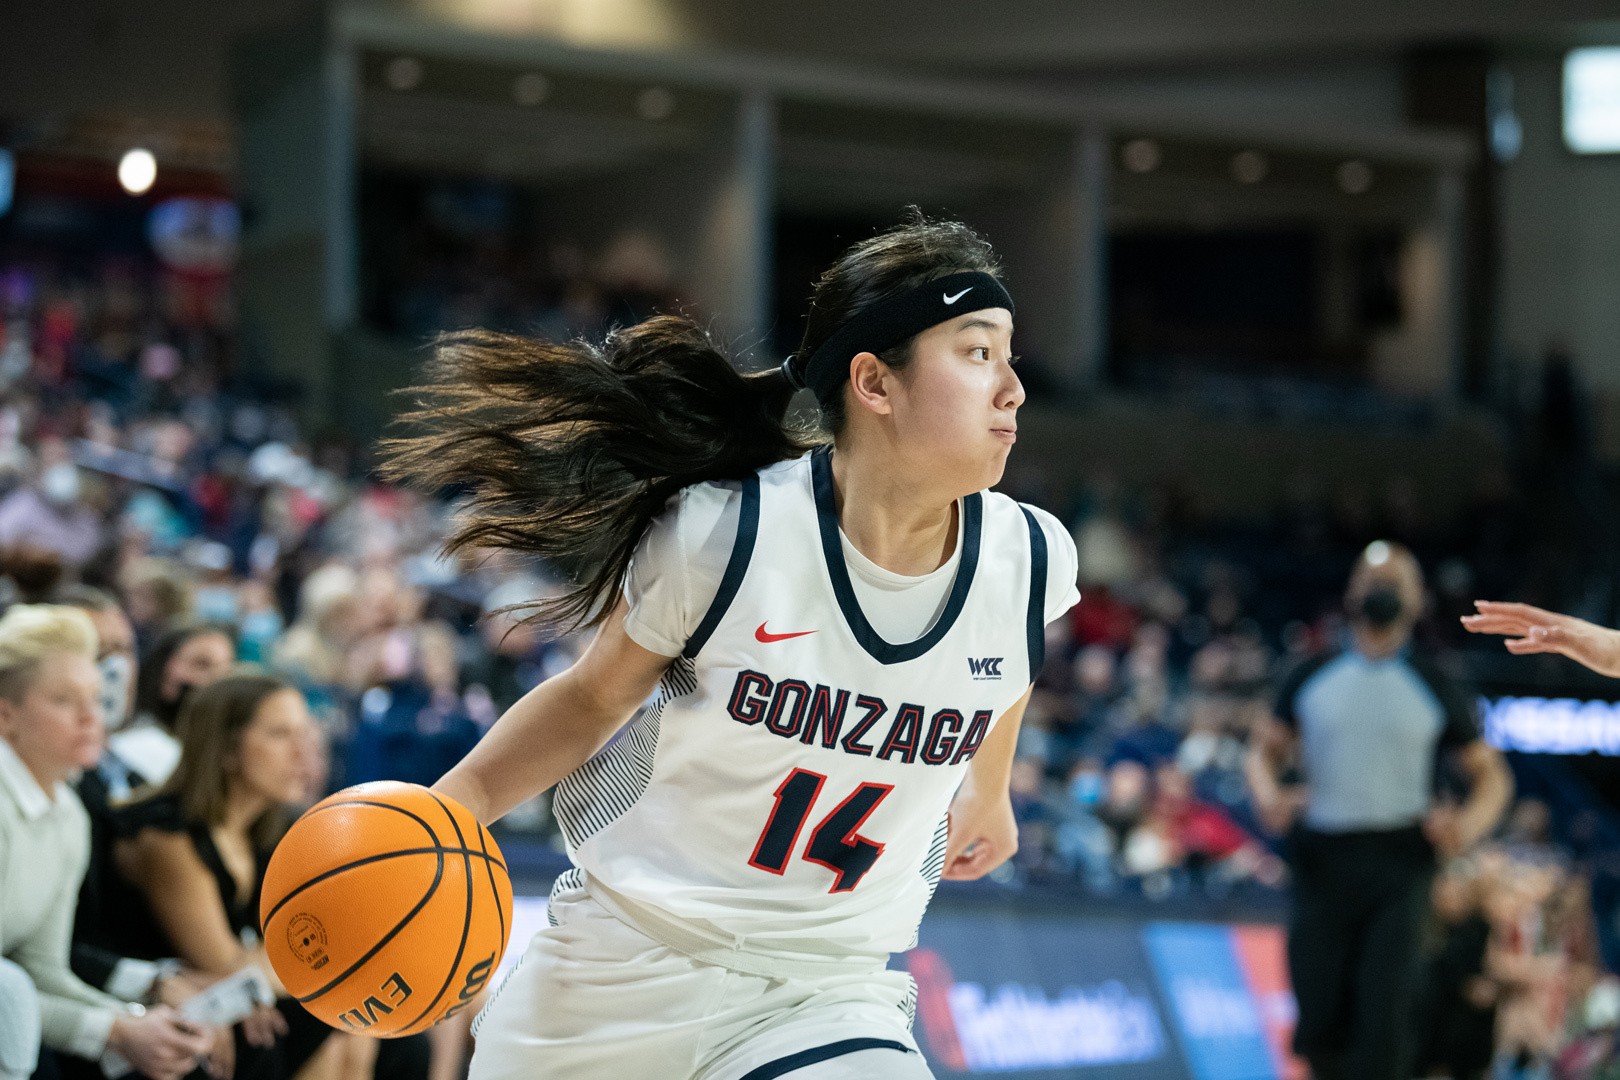 Opinion: Who should have their jersey retired next at Gonzaga